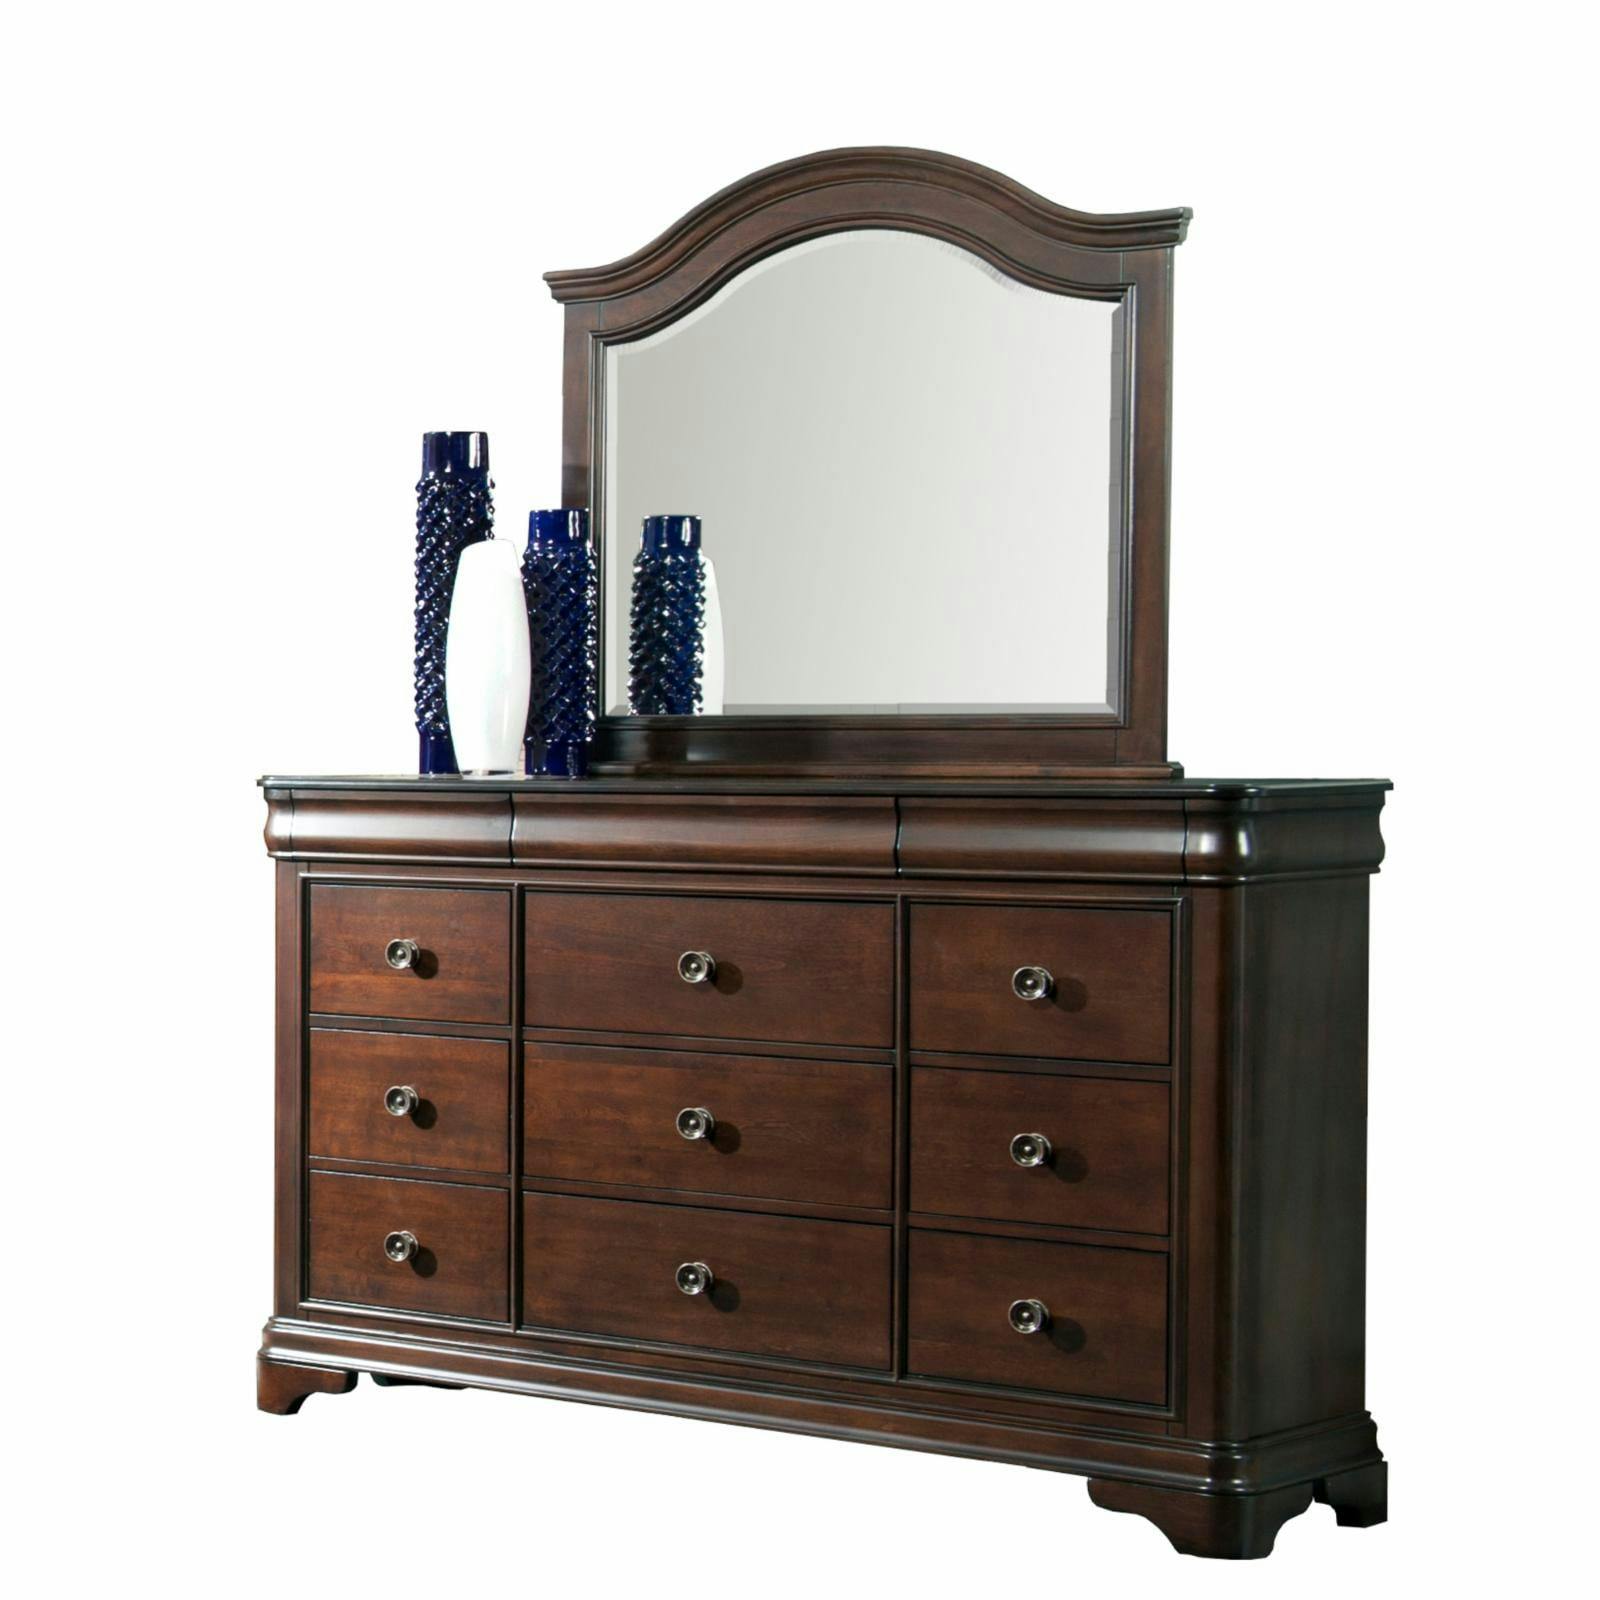 Elegant Conley 65'' Cherry Finish Dresser with Arched Mirror and Felt-Lined Drawers